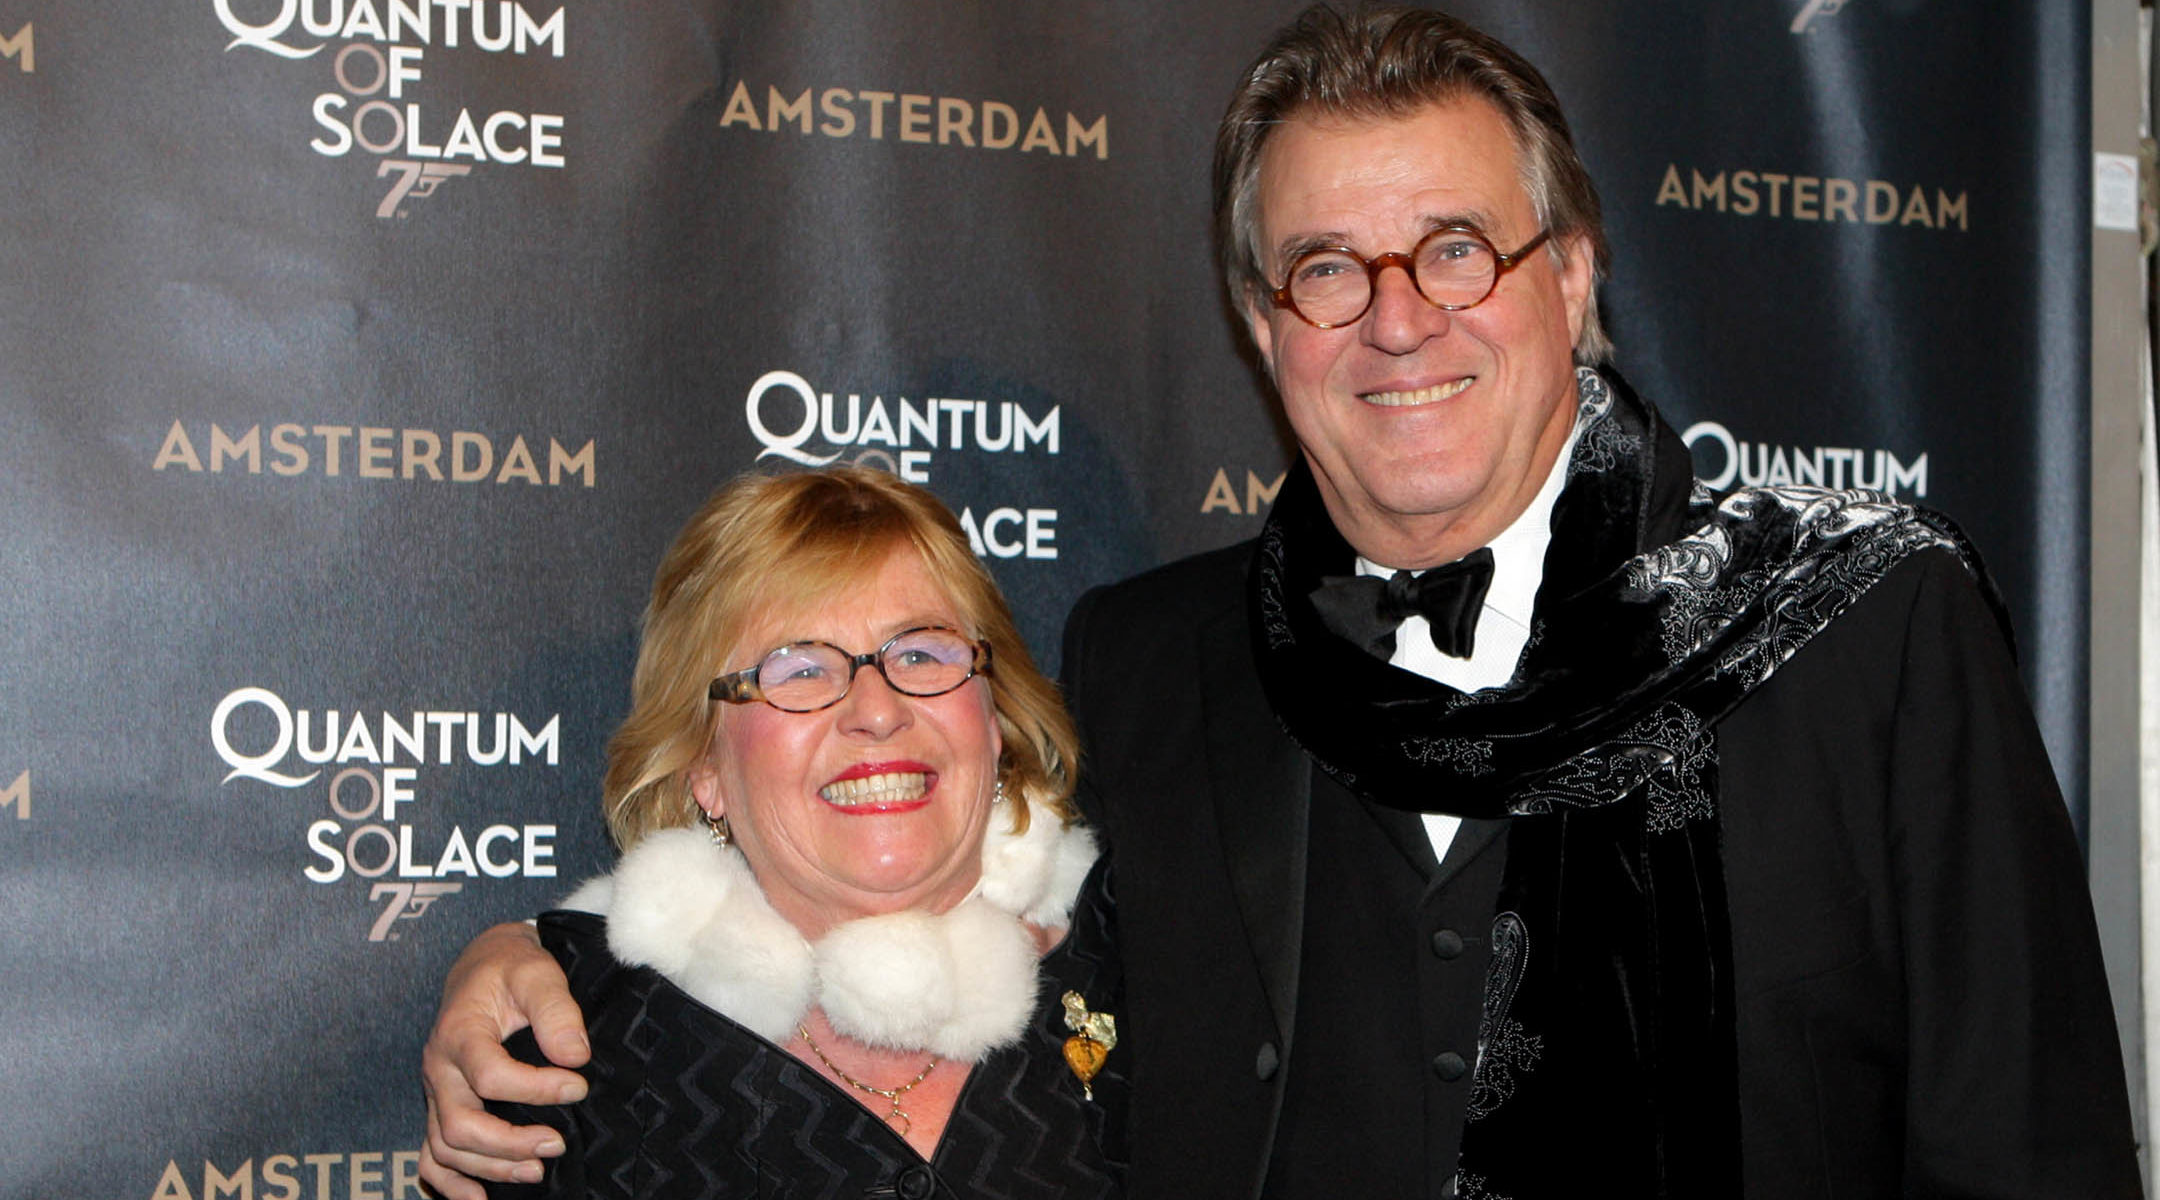 Dutch actor Jeroen Krabbe arriving with his wife Herma at a premiere at Tuschinksi Theatre in Amsterdam, the Netherlands on November 4, 2008 (Greetsia Tent/Getty Images)